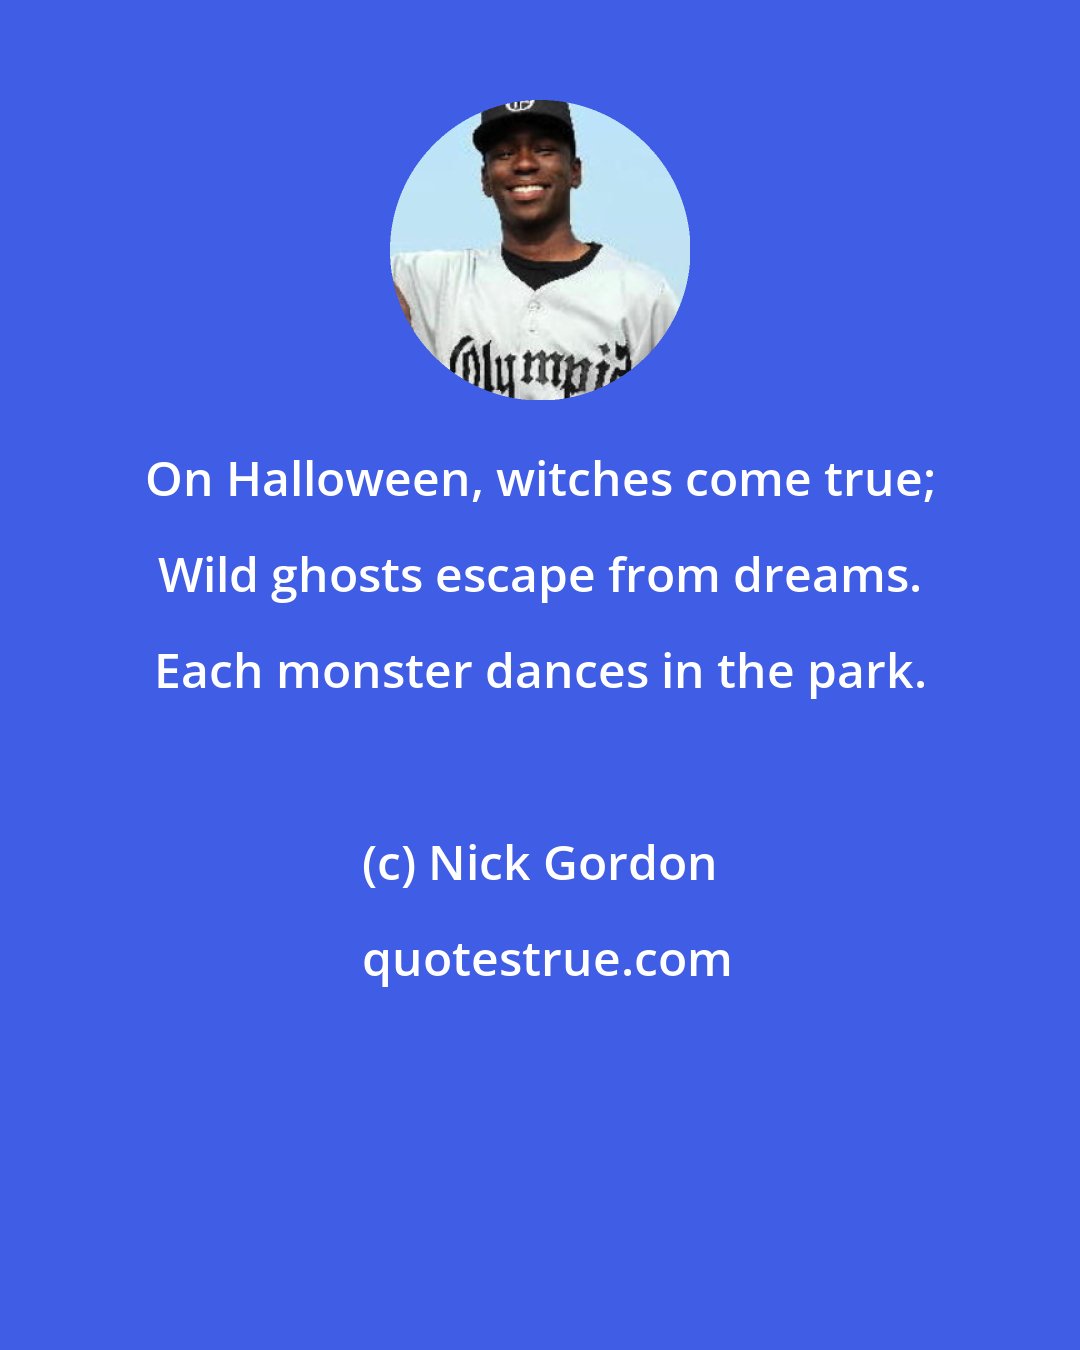 Nick Gordon: On Halloween, witches come true; Wild ghosts escape from dreams. Each monster dances in the park.